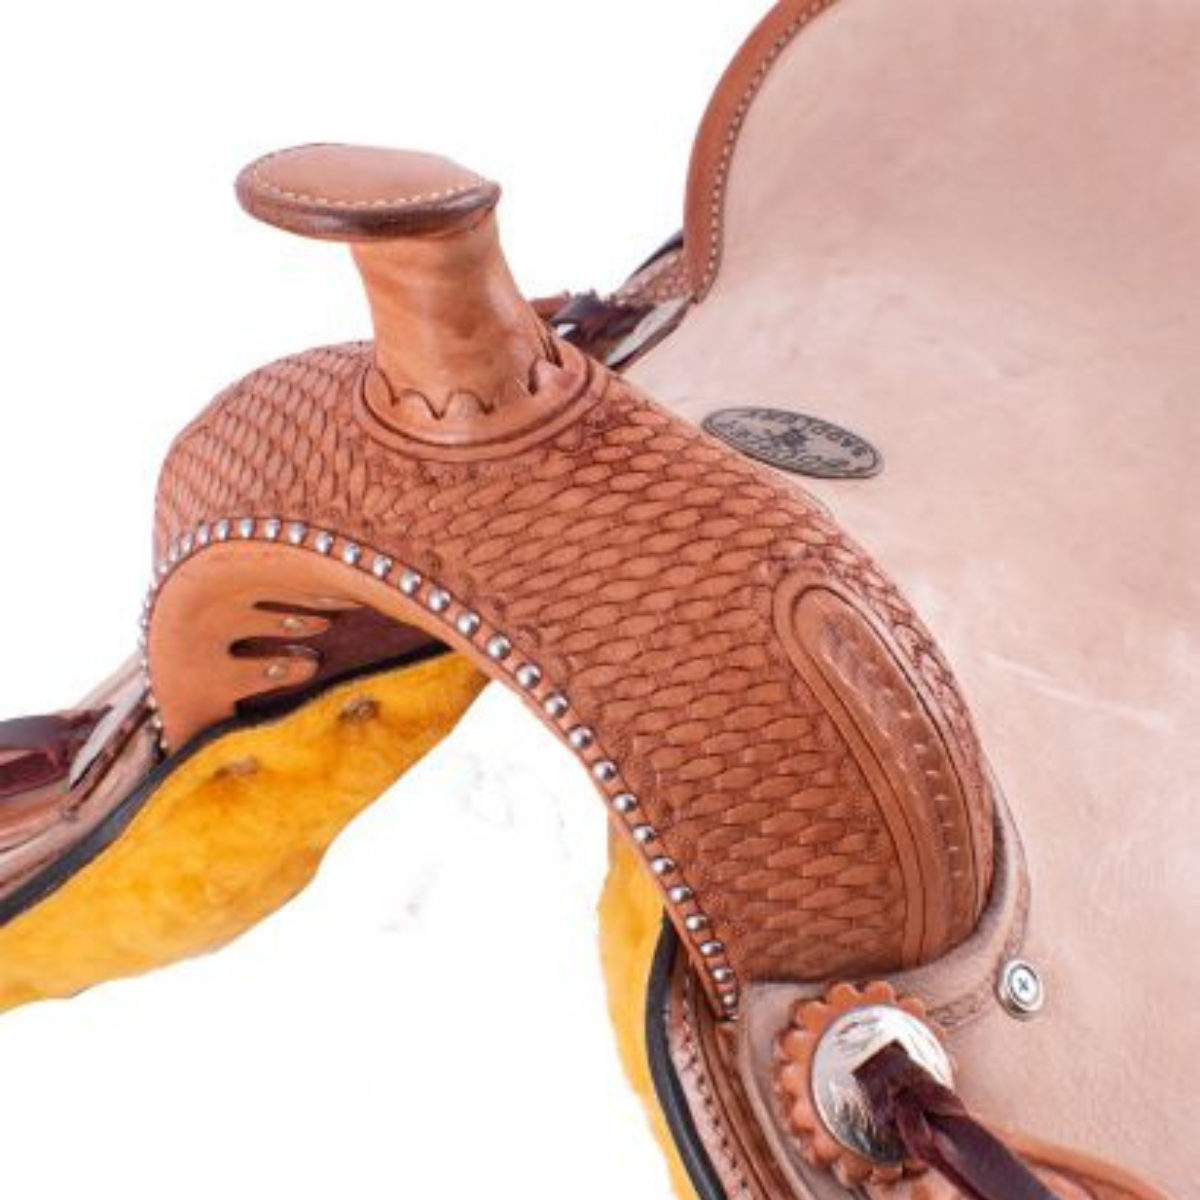 12" DOUBLE T YOUTH ROPING SADDLE - BASKETWEAVE TOOLING - Double T Saddles